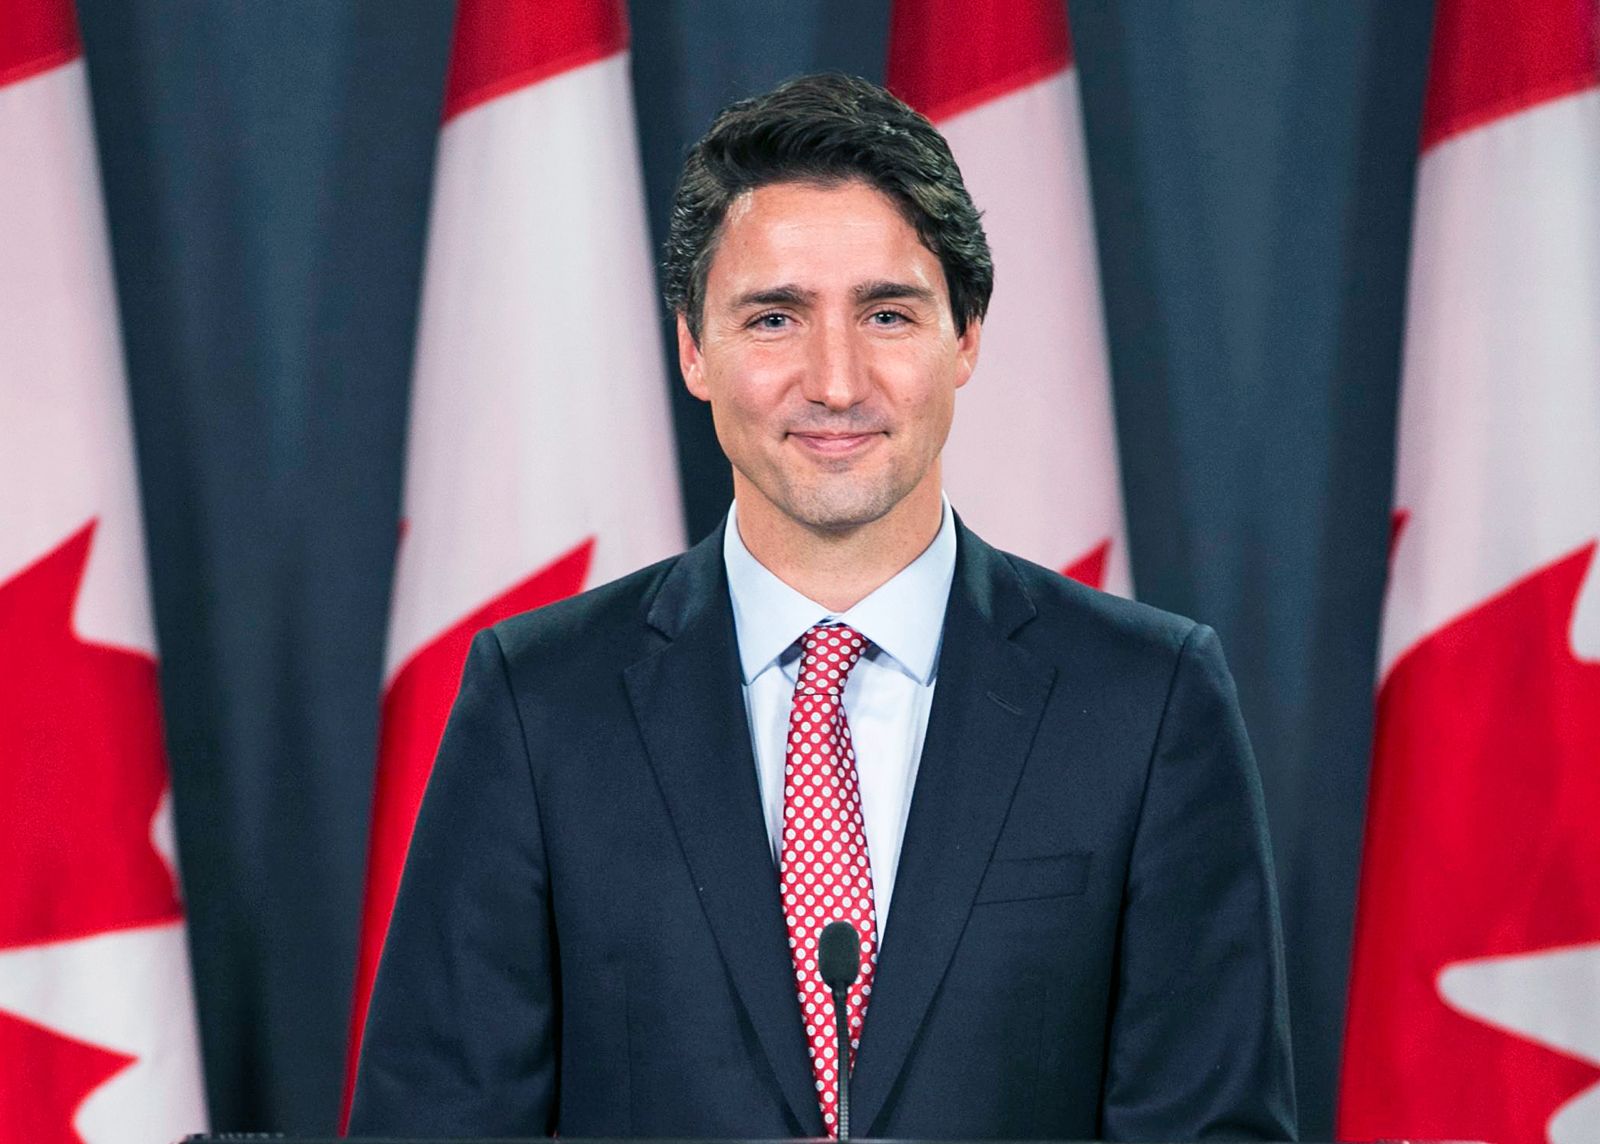 Justin Trudeau. Biography, Facts, & Father